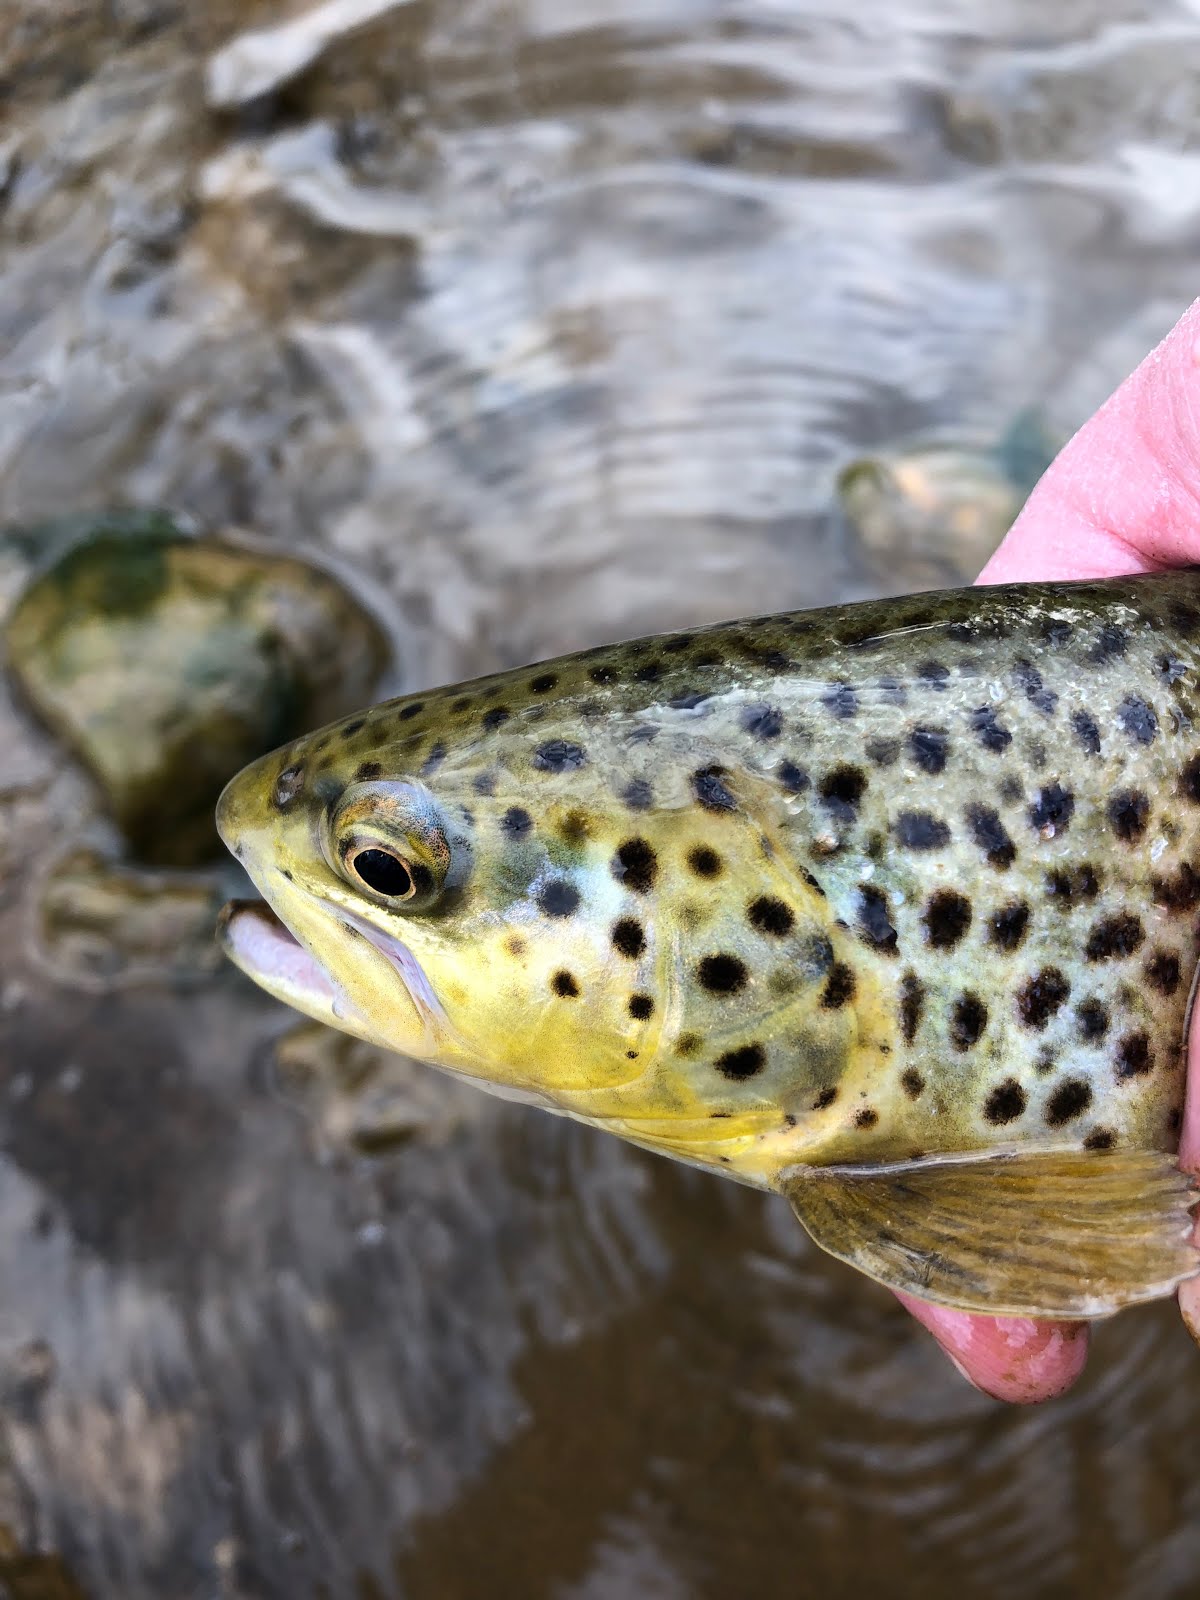 One trout, many spots